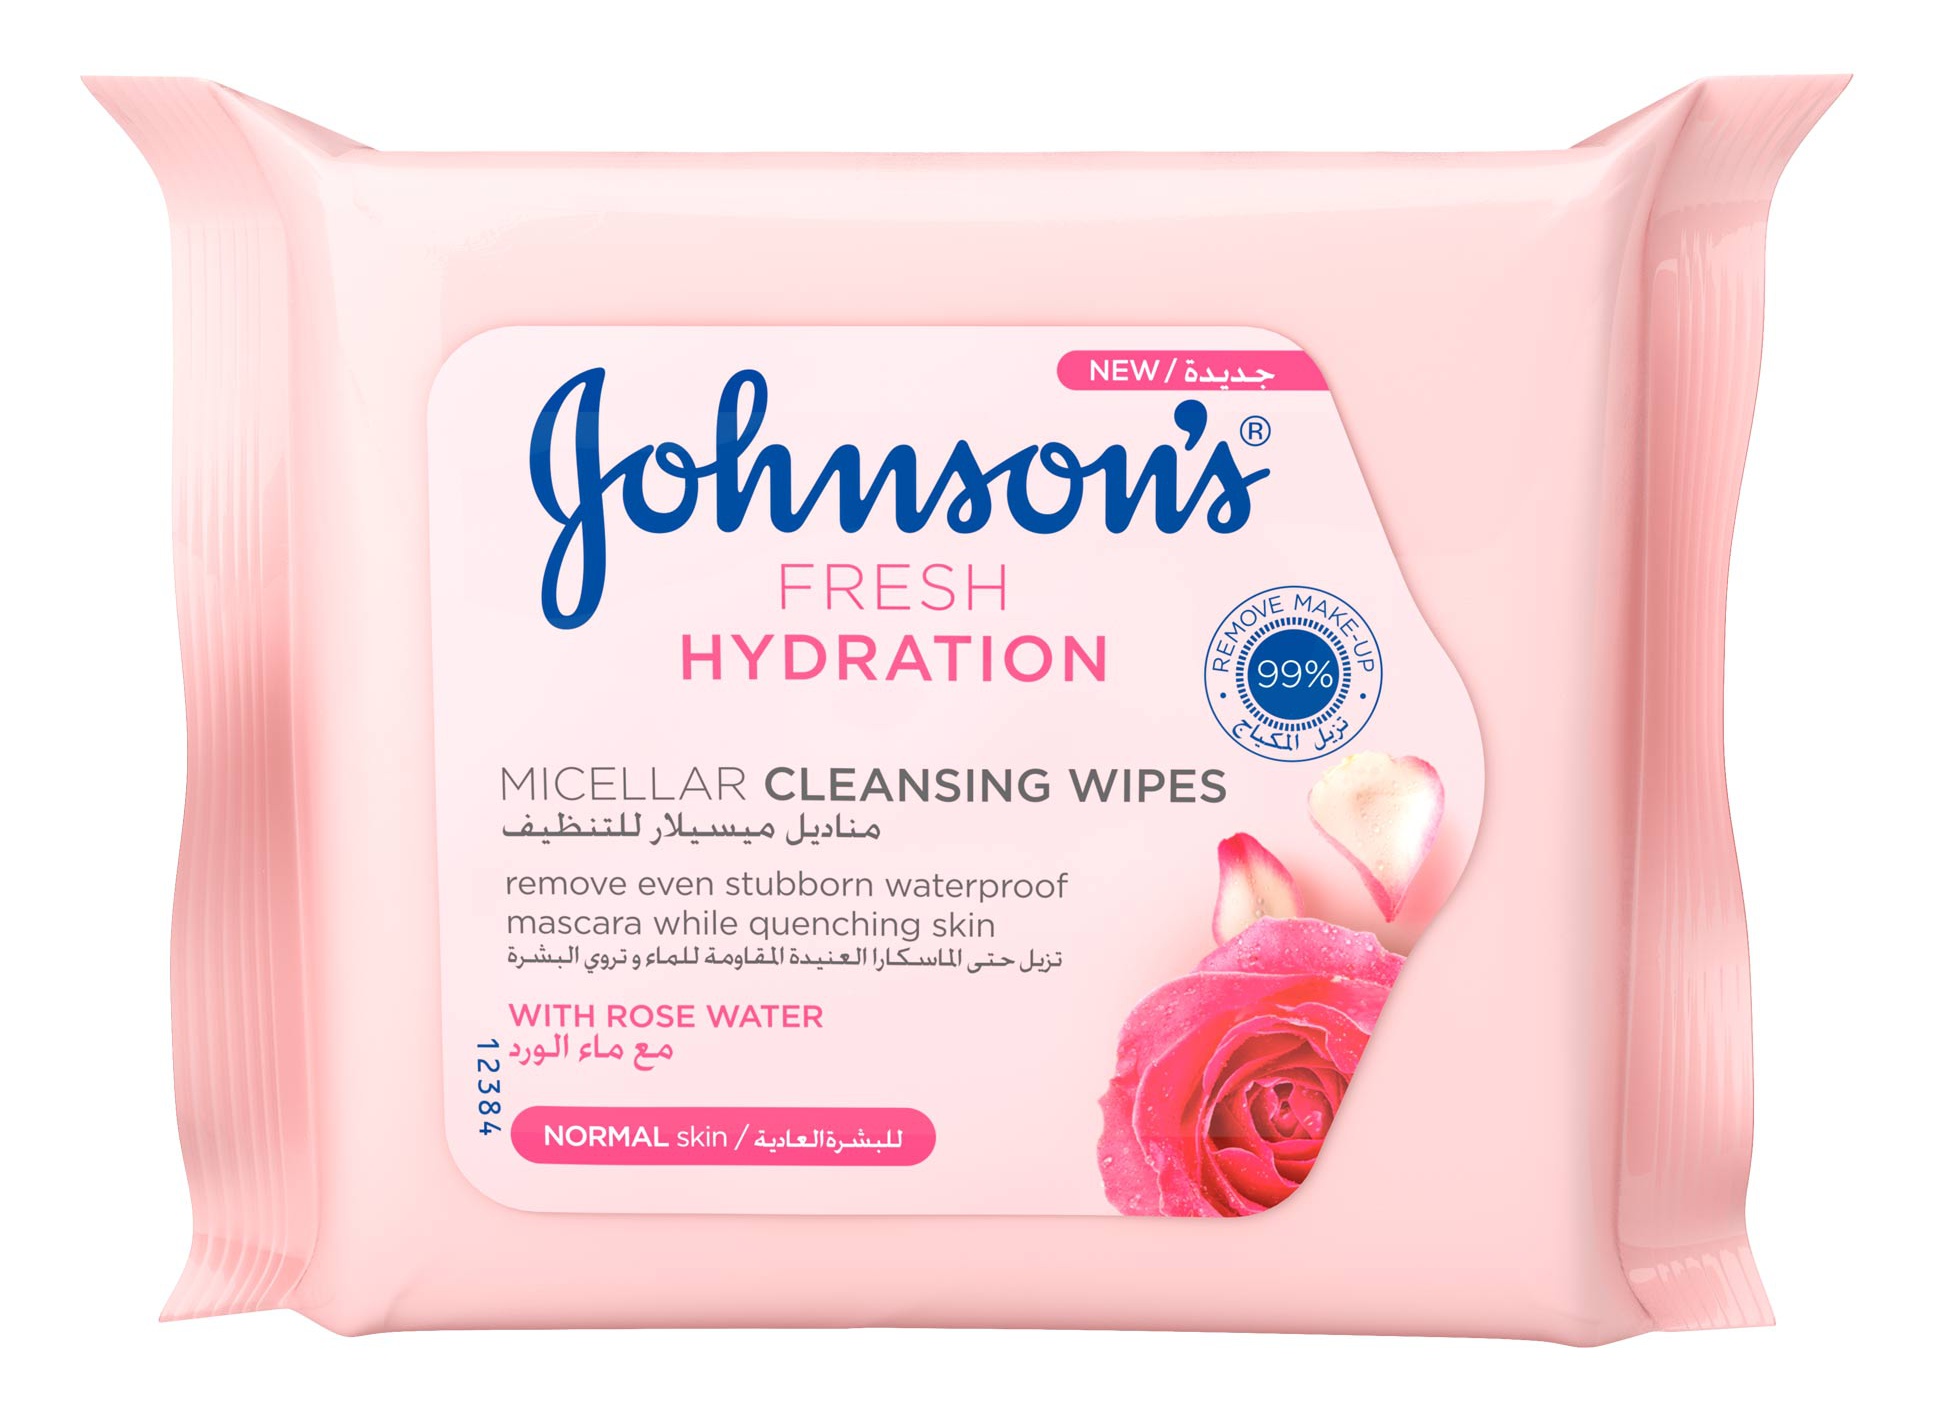 Johnson's Fresh Hydration Micellar Cleansing Wipes